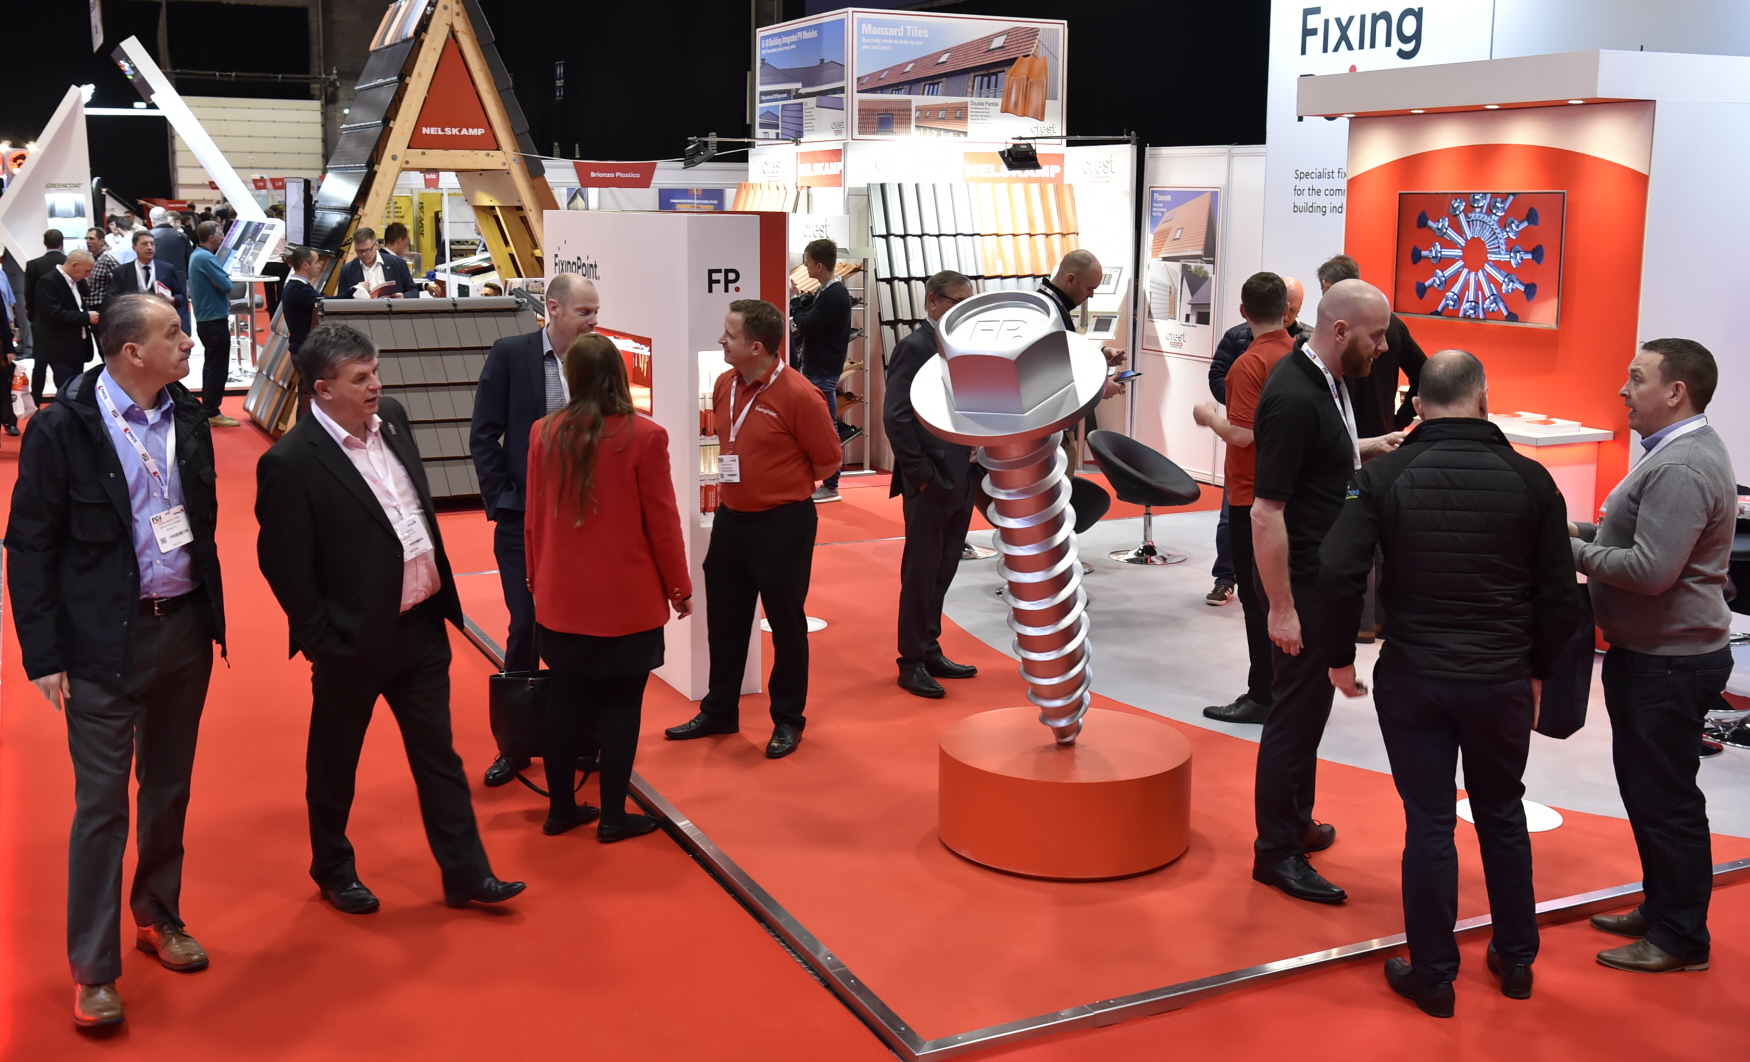 Roofing Cladding & Insulation Show Offers Opportunities for Professional Development @rci_show